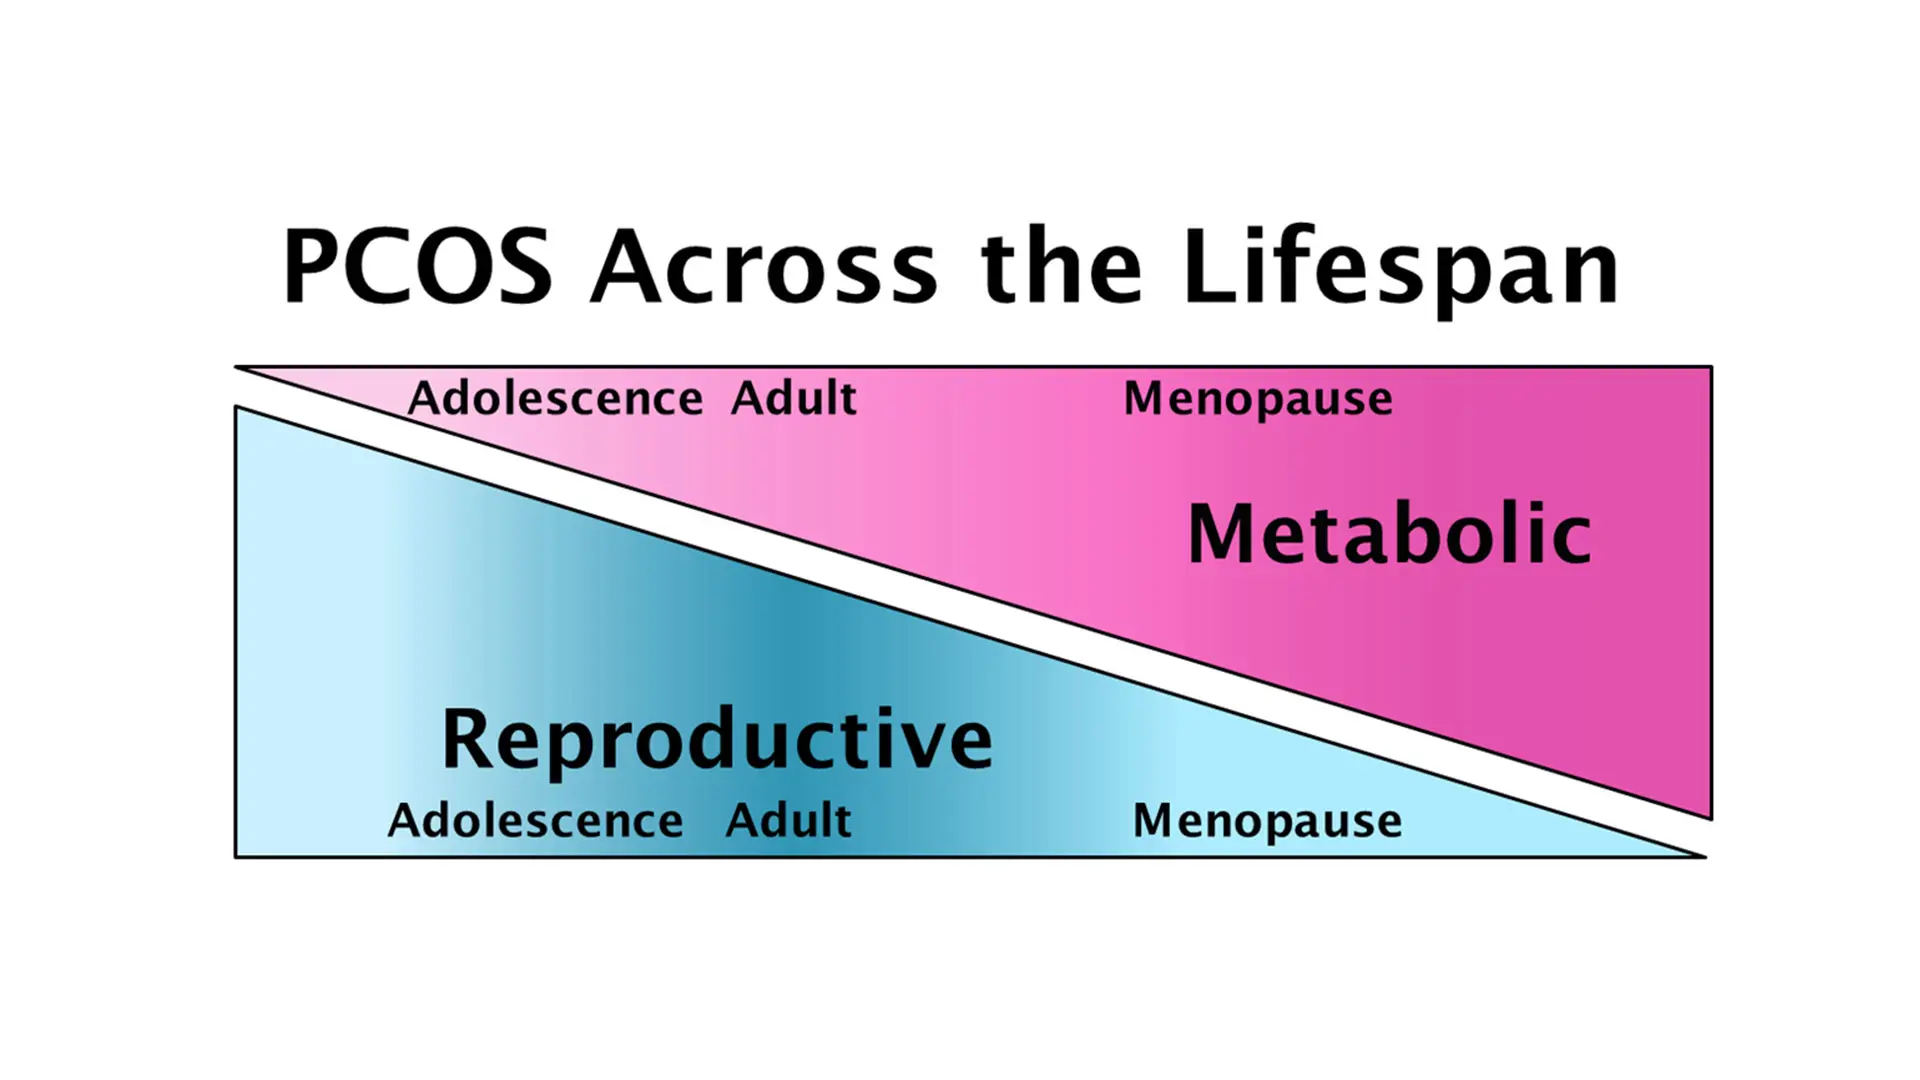 PCOS affects women across the lifespan, with reproductive features that begin in adolescence and resolve with age, and metabolic features that worsen in adulthood and persist after menopause.